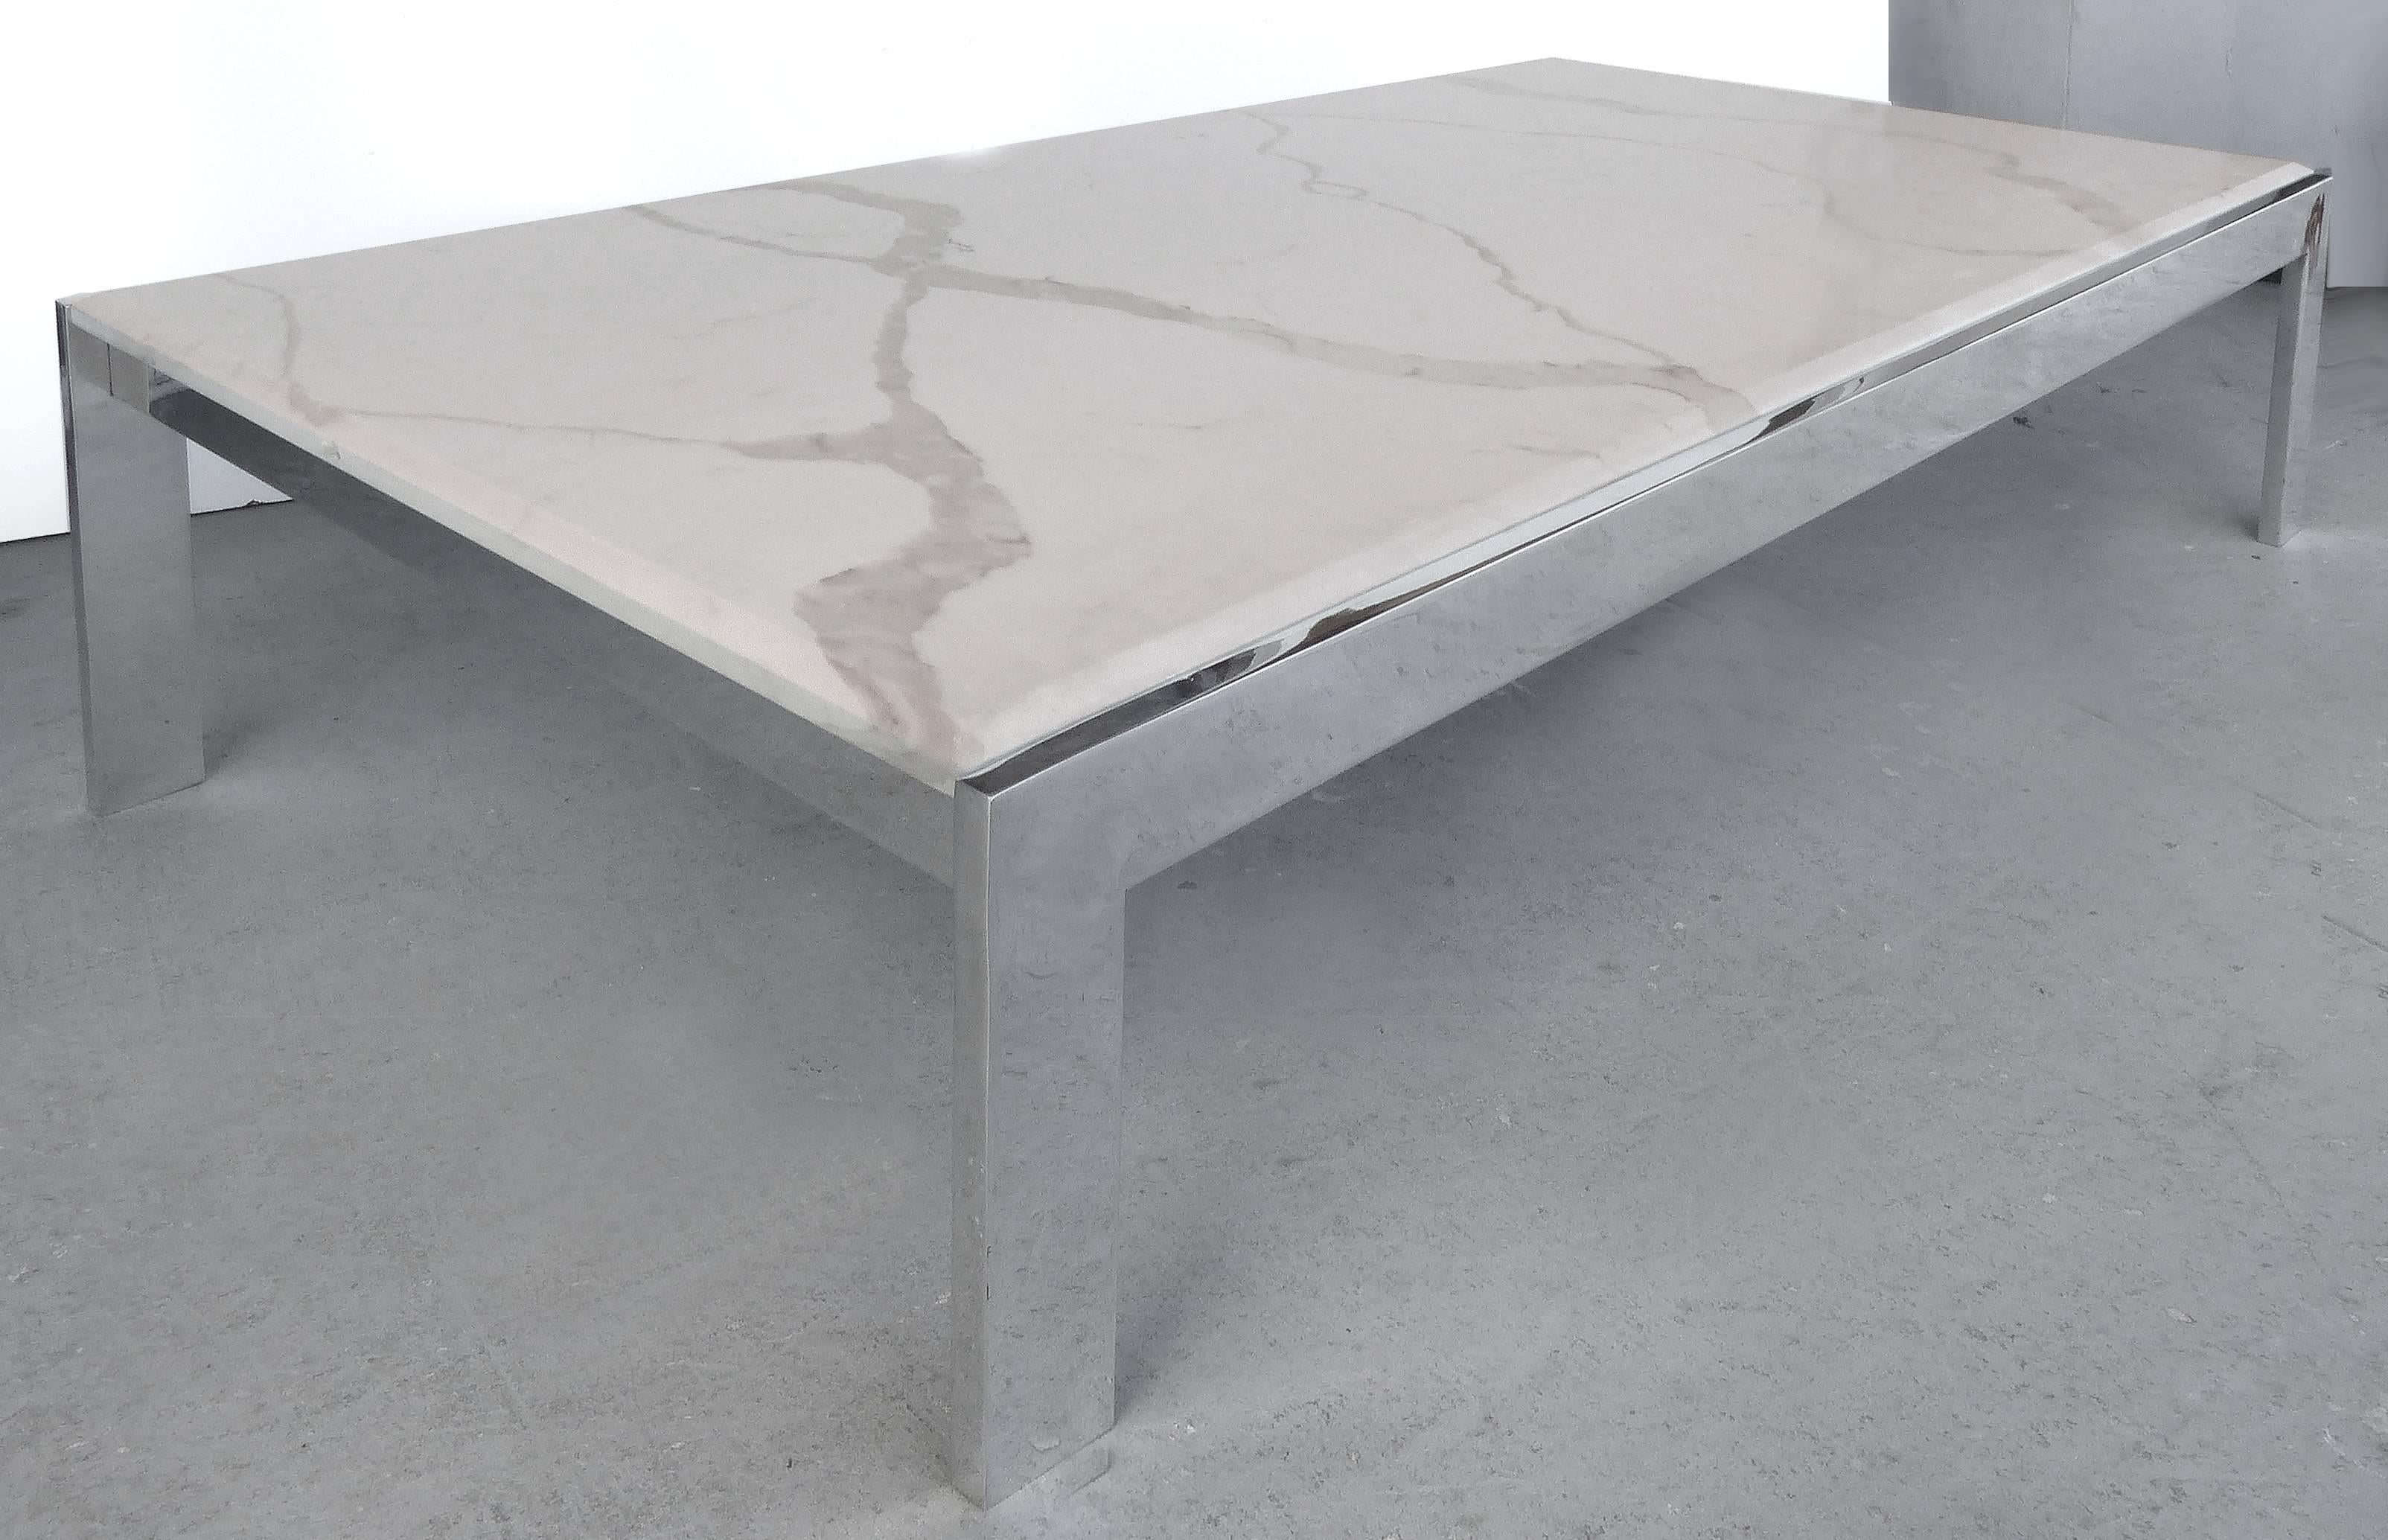 Offered for sale is a Minimalist coffee table with a solid polished aluminum base and a quartz top. The top shows a subtle gray veining pattern across the quartz. The ends of the top are beveled and extend beyond the frame.